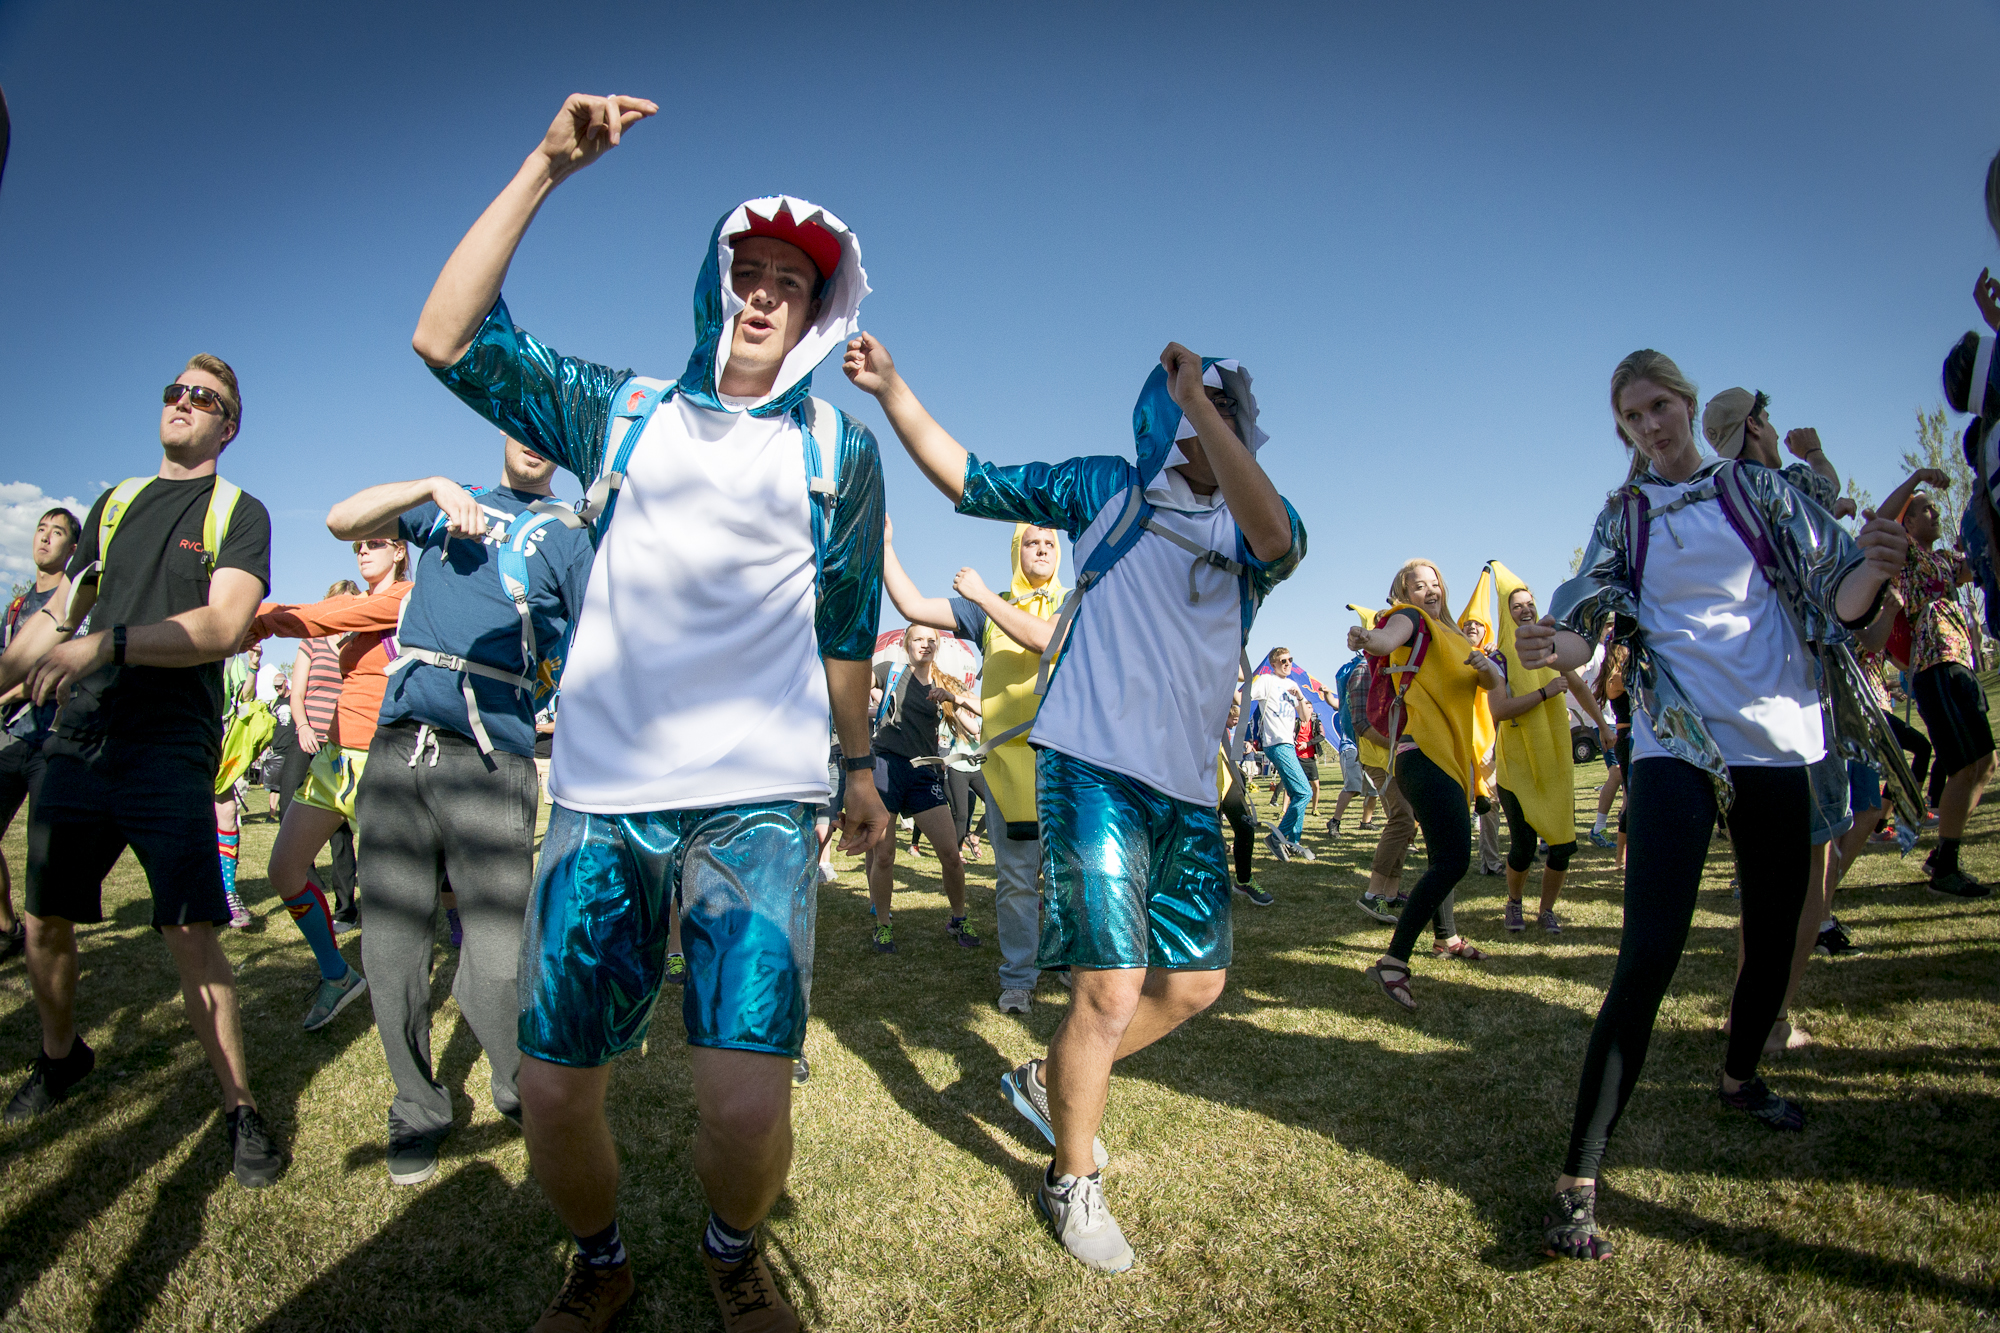 Students wearing costumes prepare to compete in the Questival. (Ethan White)